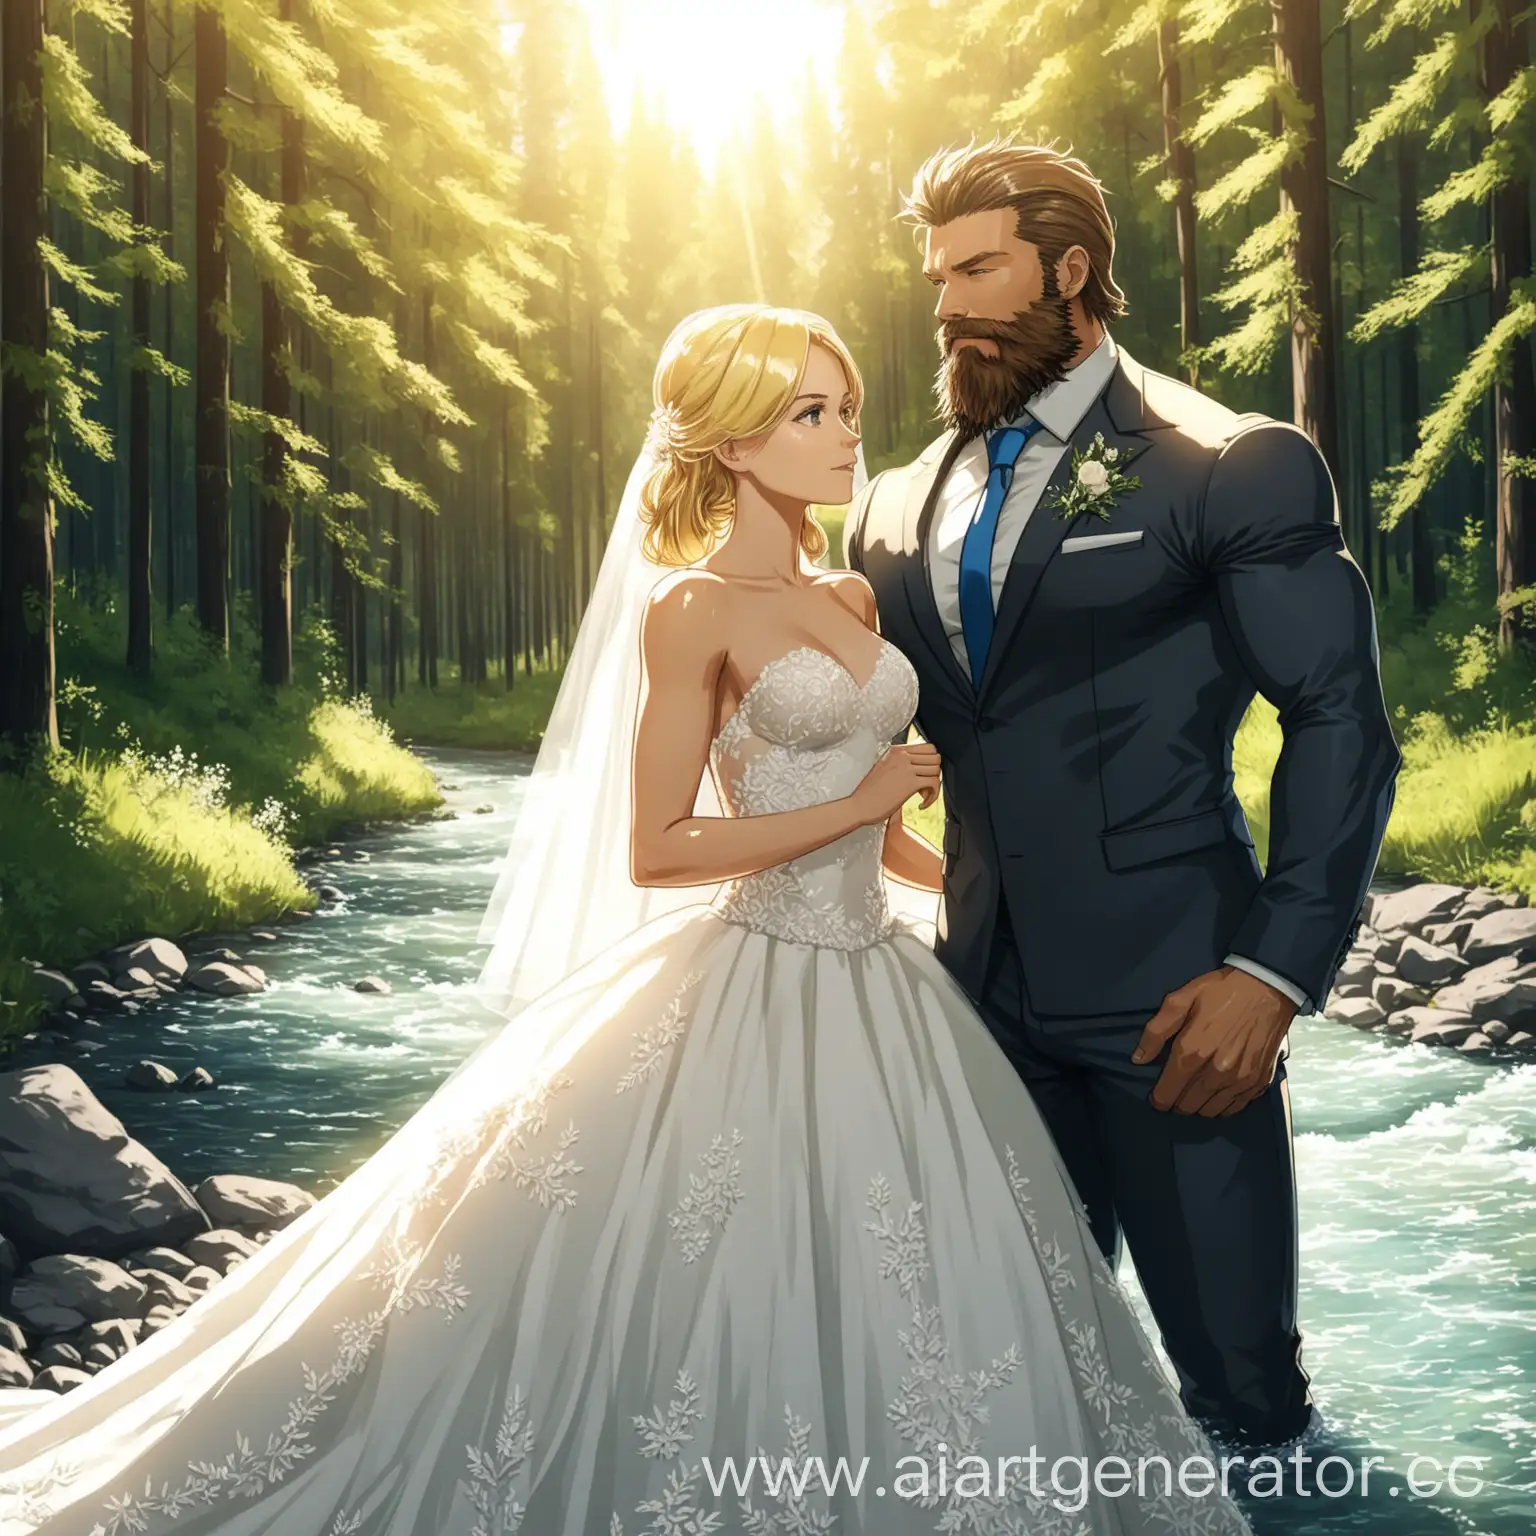 Sunny-Forest-Wedding-Blissful-Bride-and-Groom-by-the-River